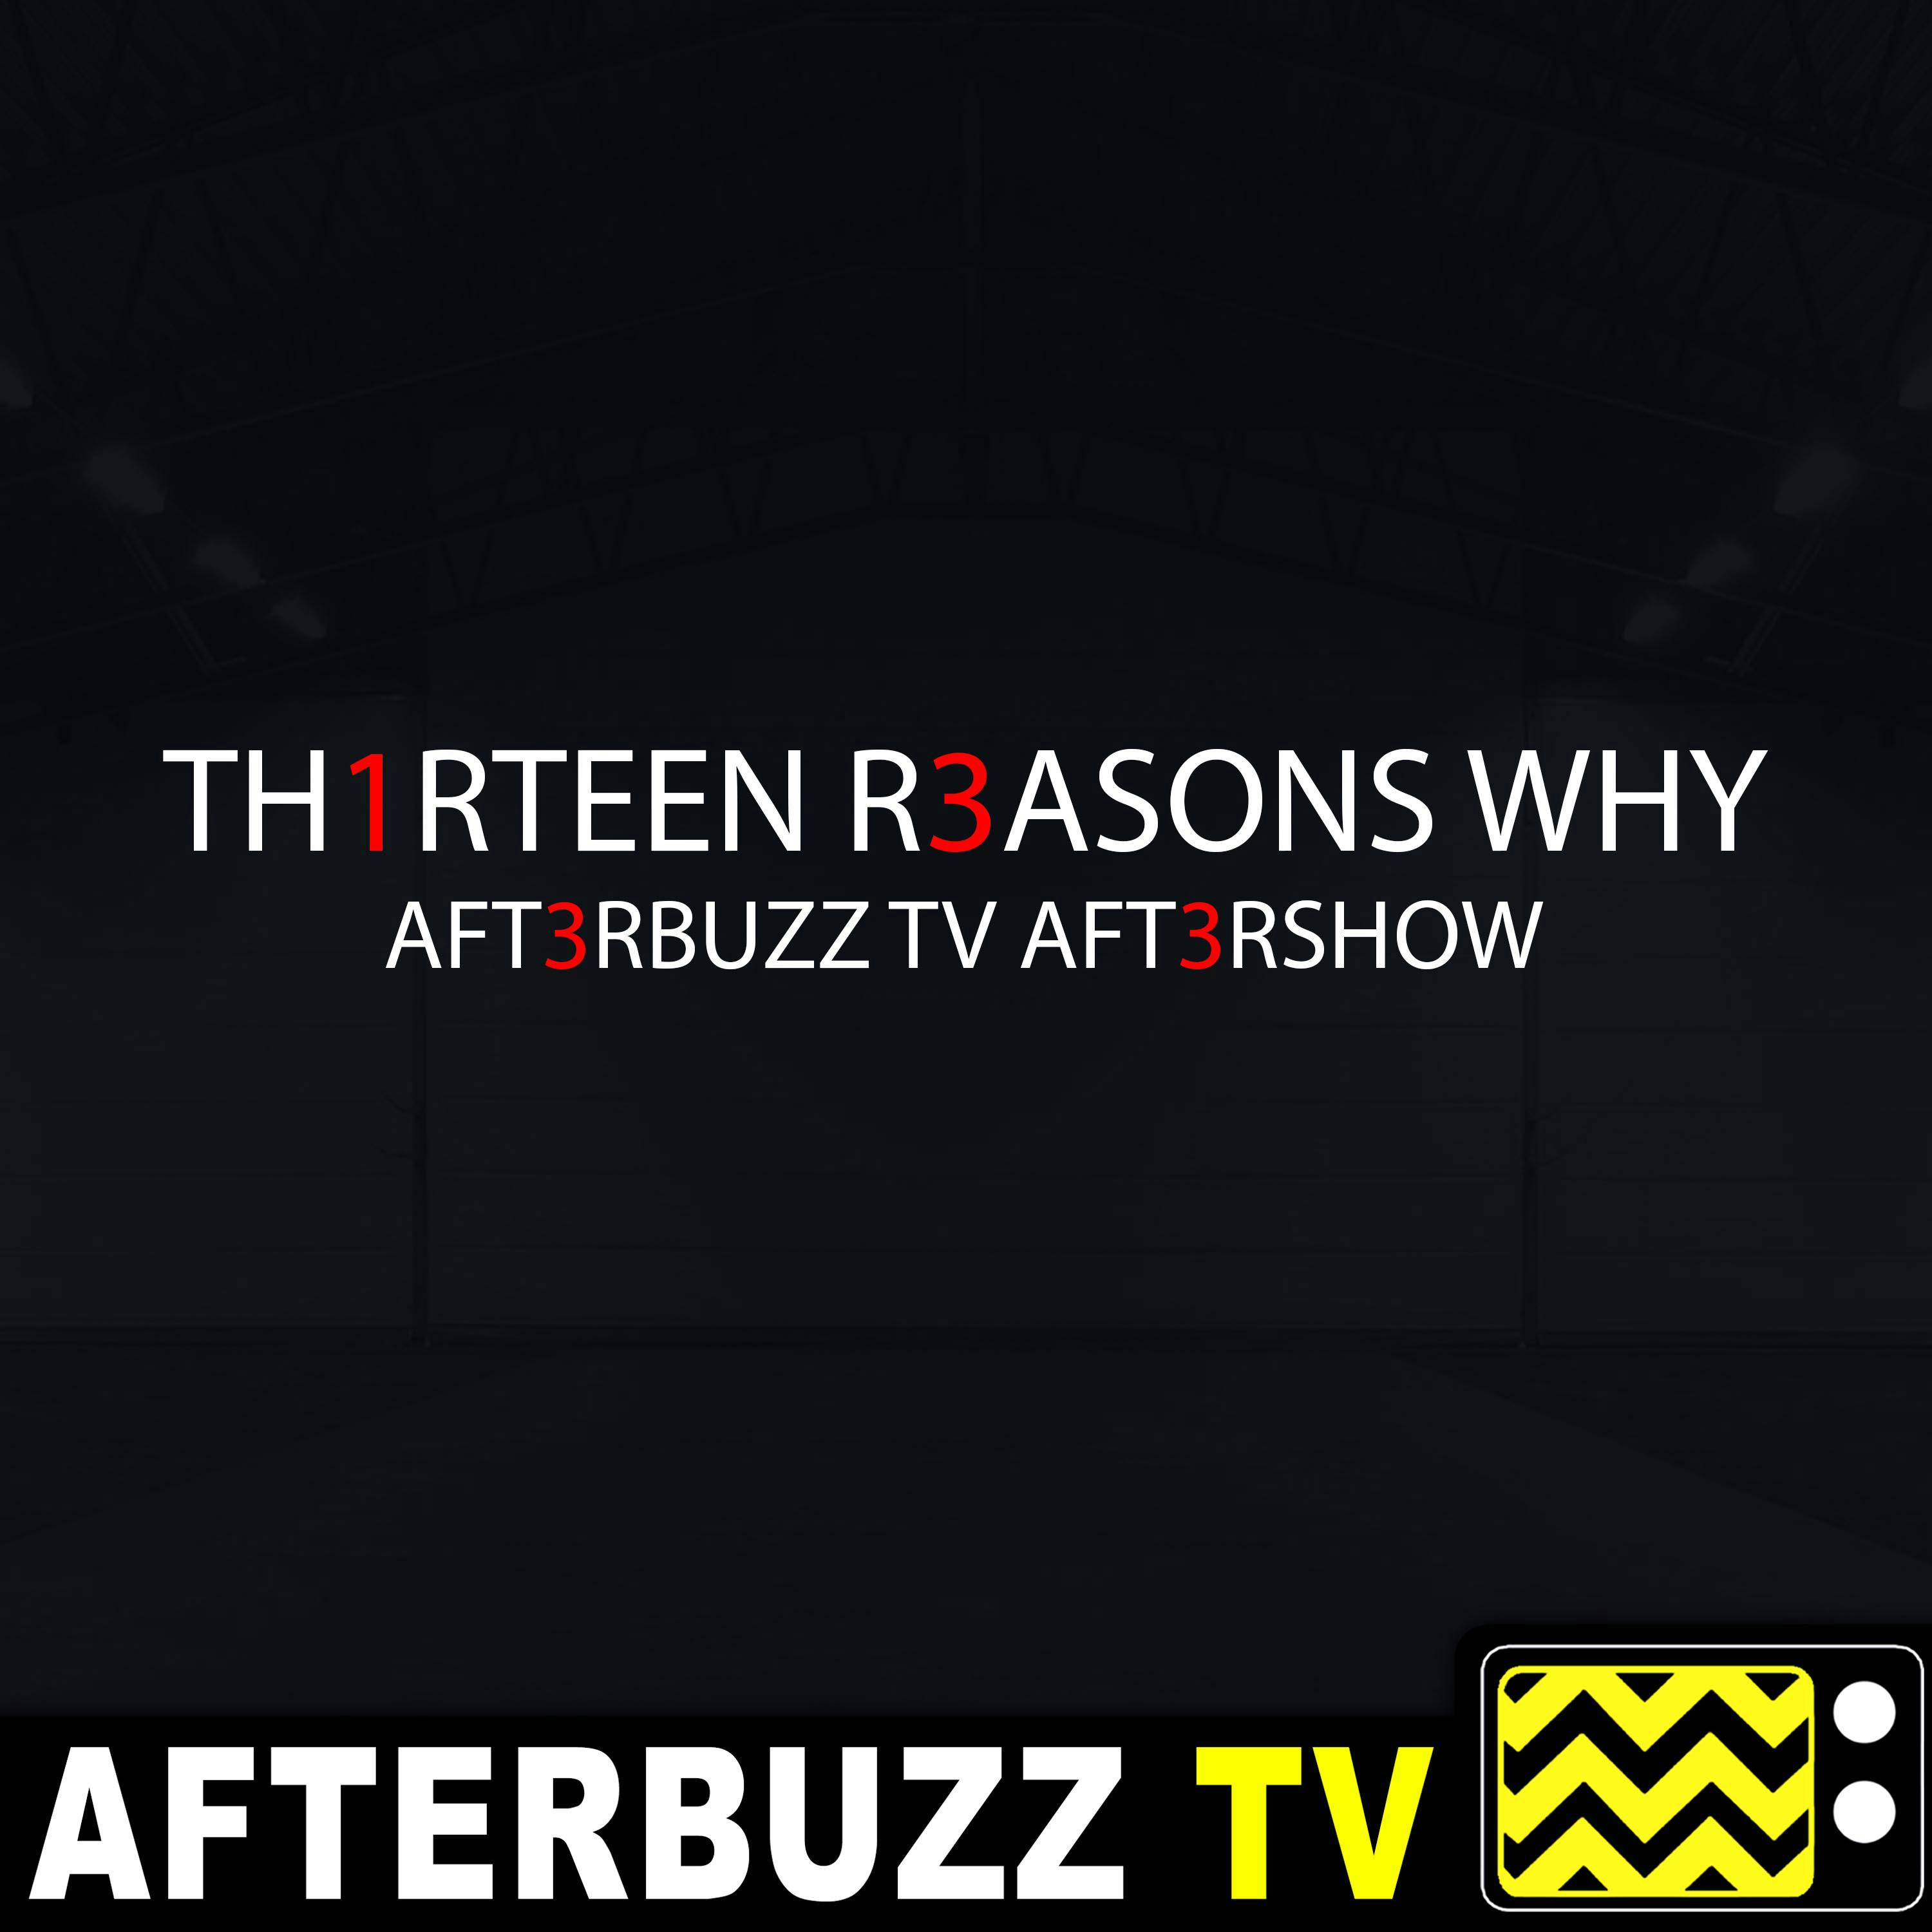 ”Always Waiting for the Bad News” Season 3 Episode 9 ’13 Reasons Why’ Review